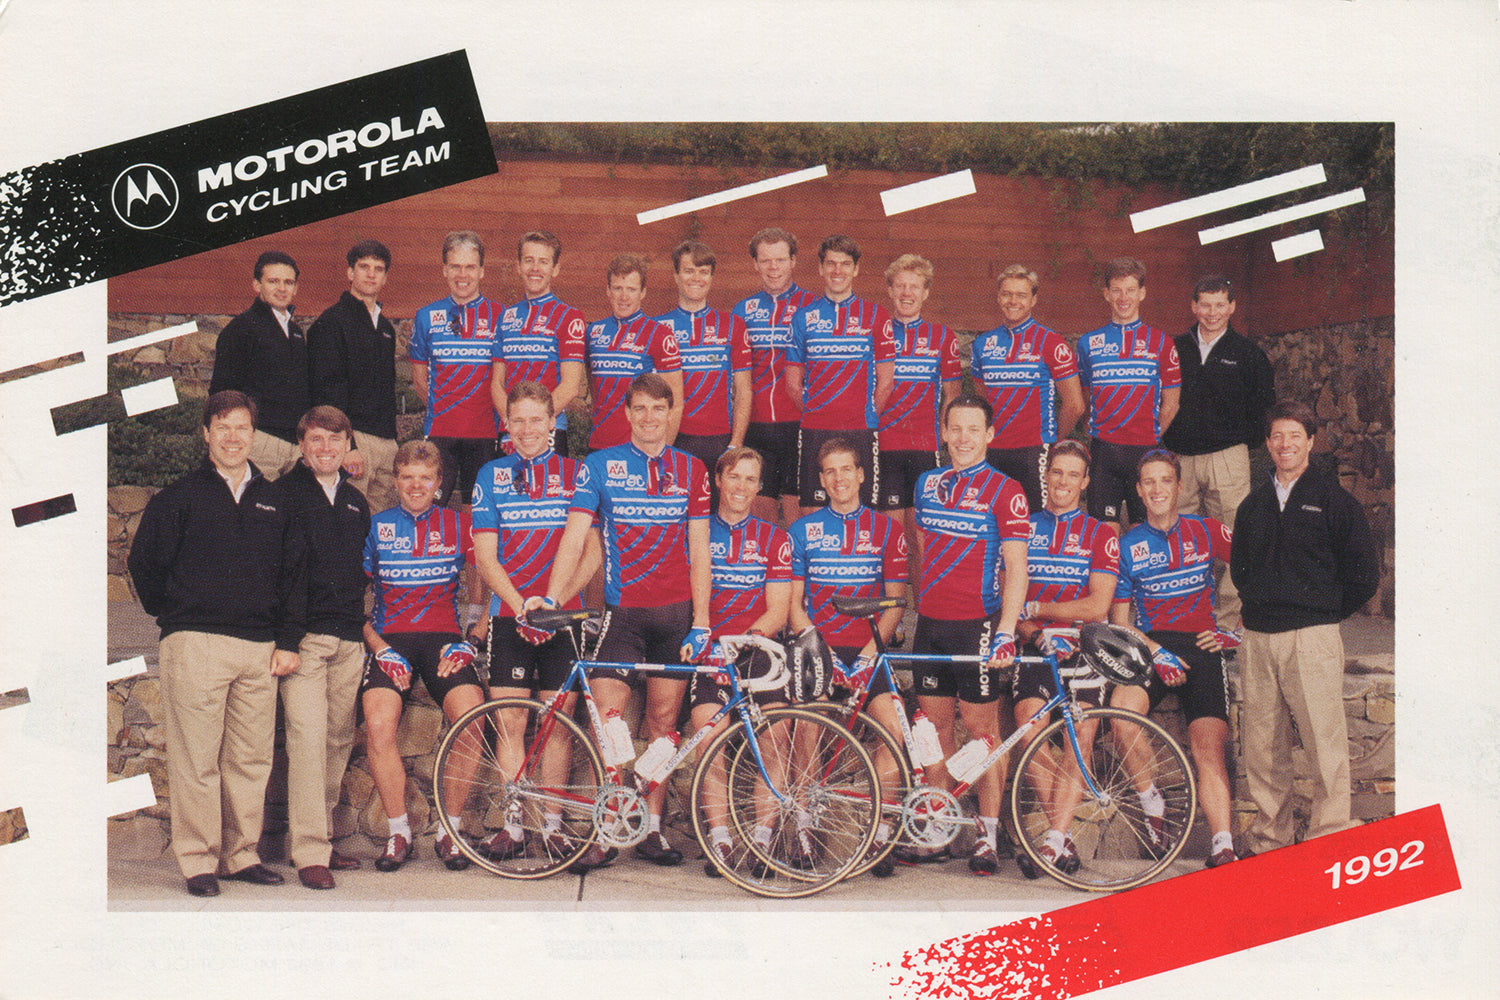 Motorola cycling team postcard from the 1992 season featuring some nifty corporate chinos!